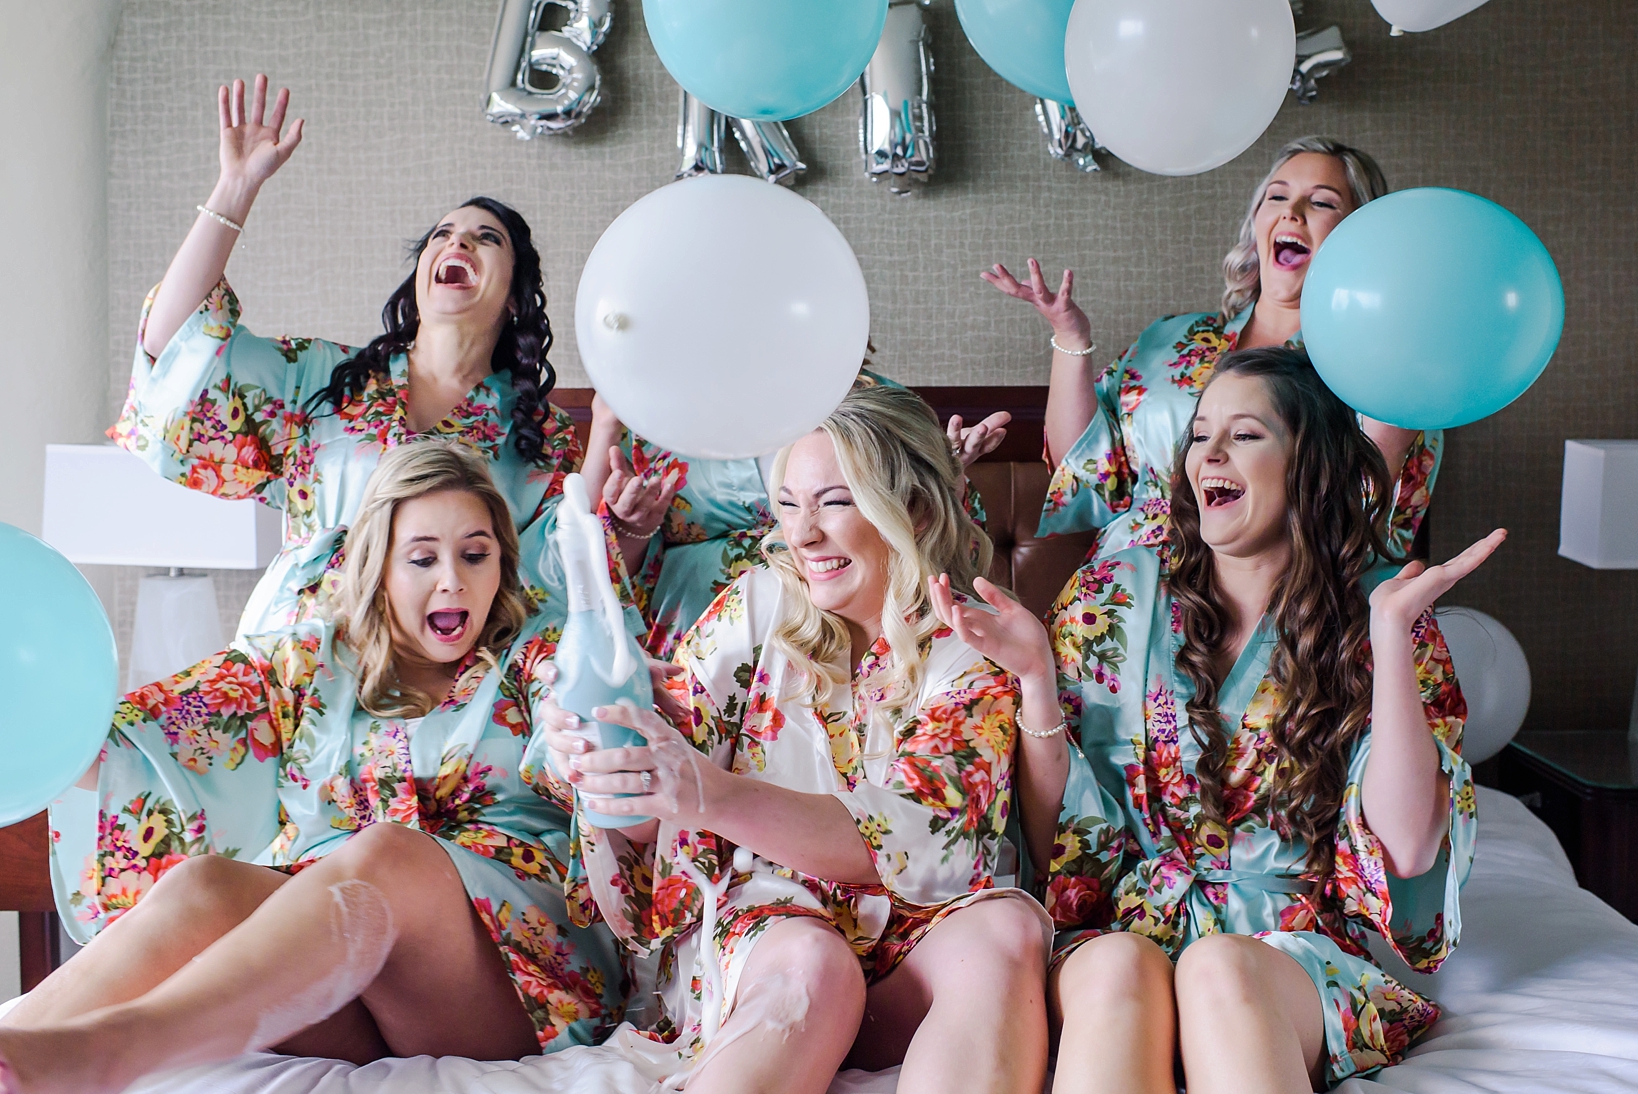 The bride and her bridesmaids popping champagne on the bed surrounded by balloons